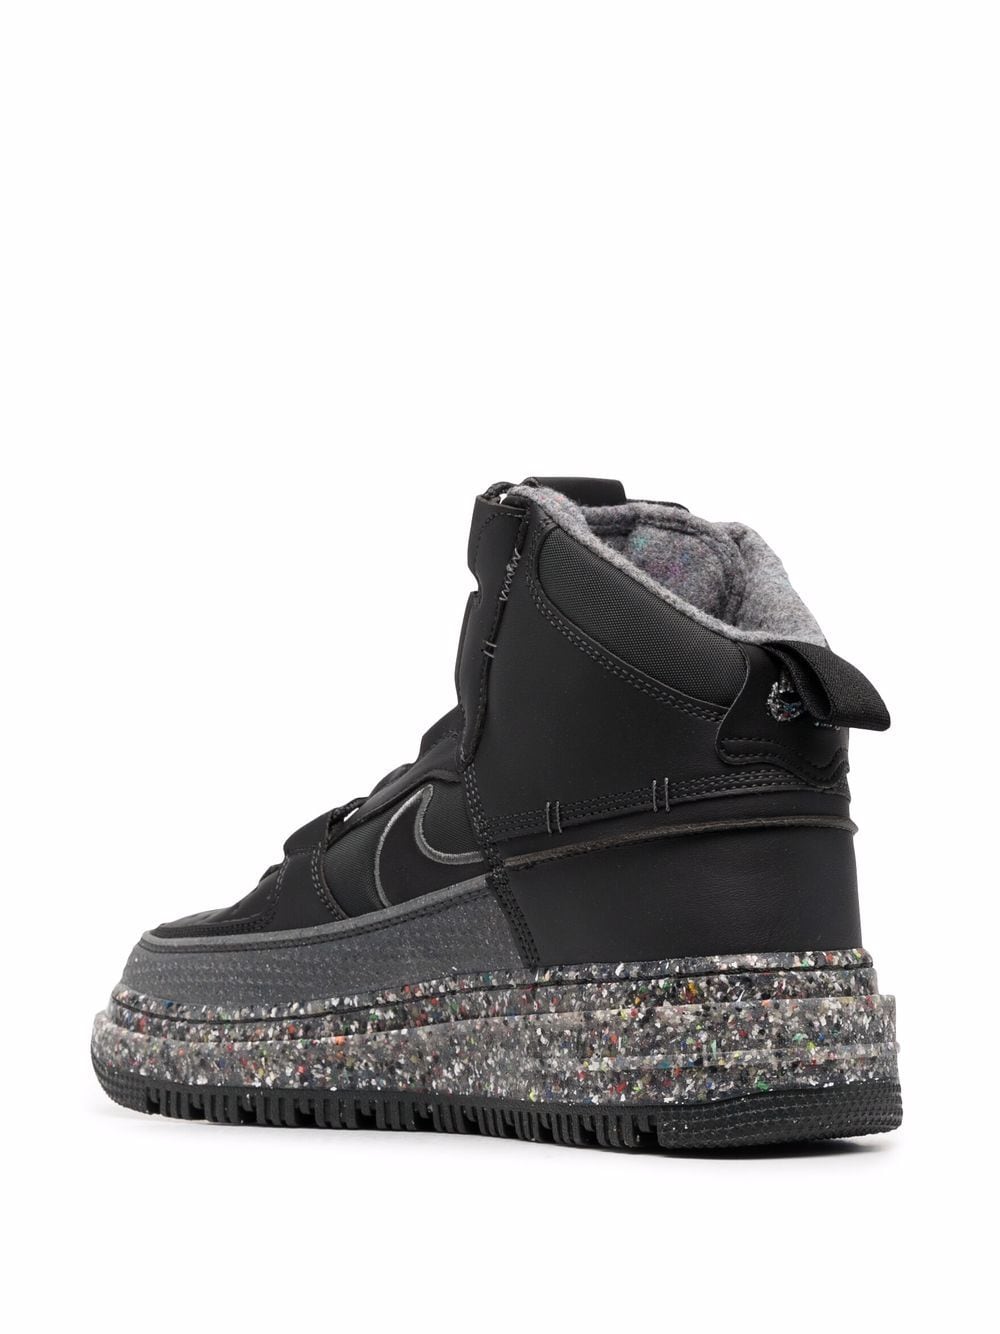 Mendigar Arrugas cojo Shop Nike Air Force 1 boots with Express Delivery - FARFETCH